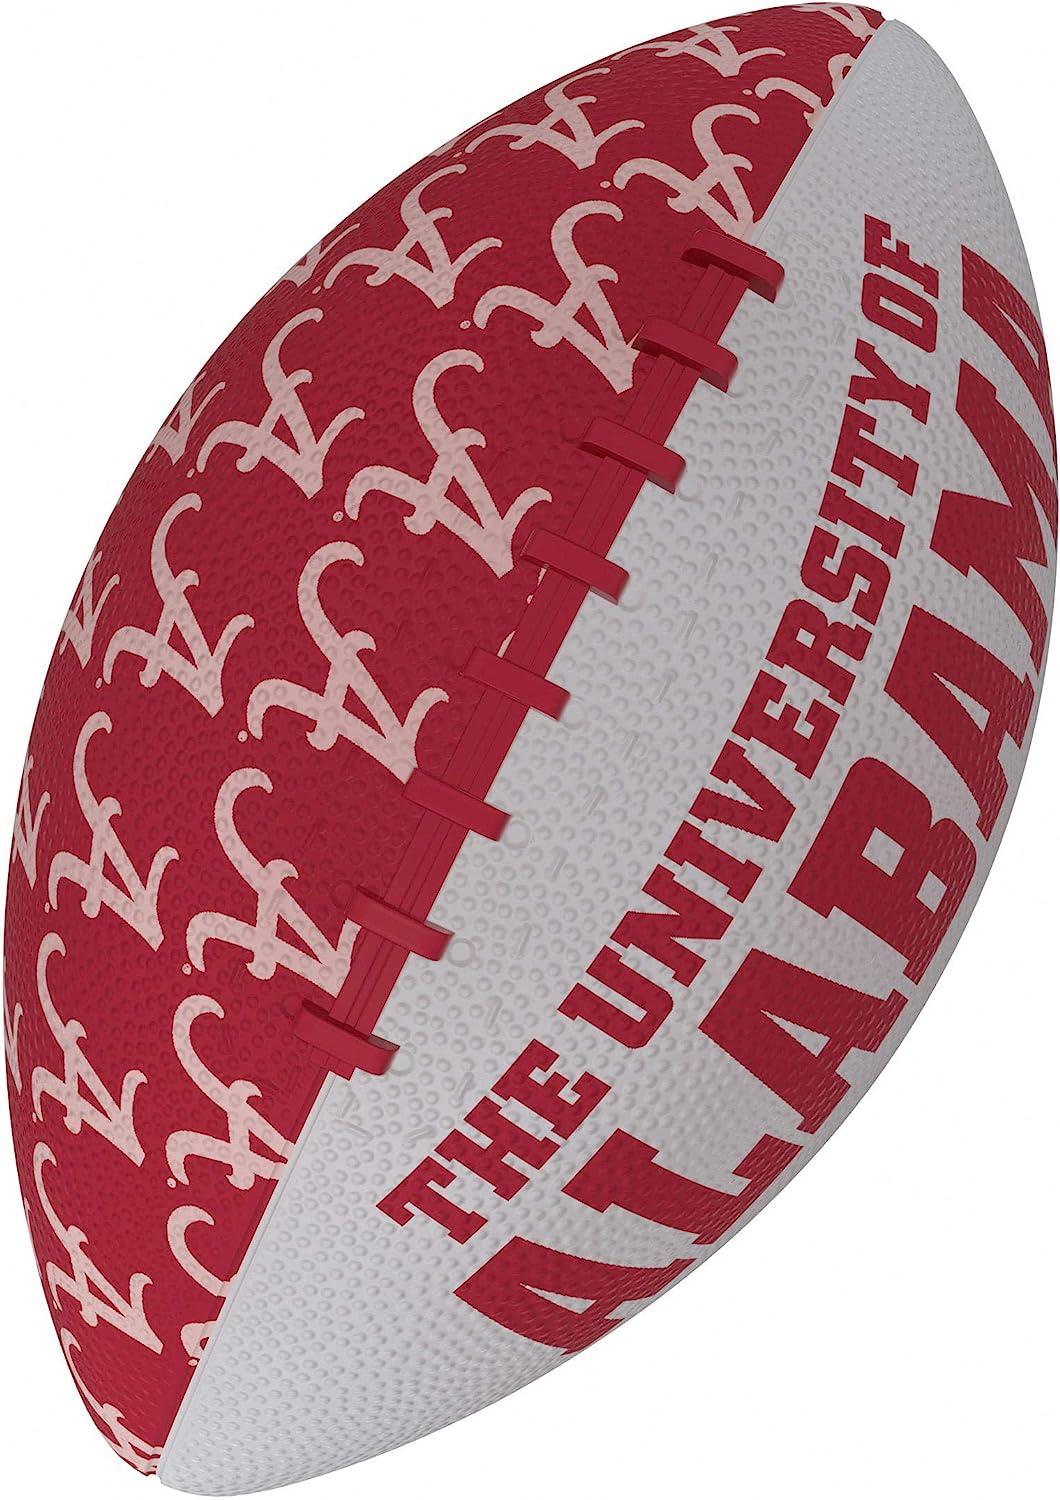 Promotional Mini Size Branded American Football Ball